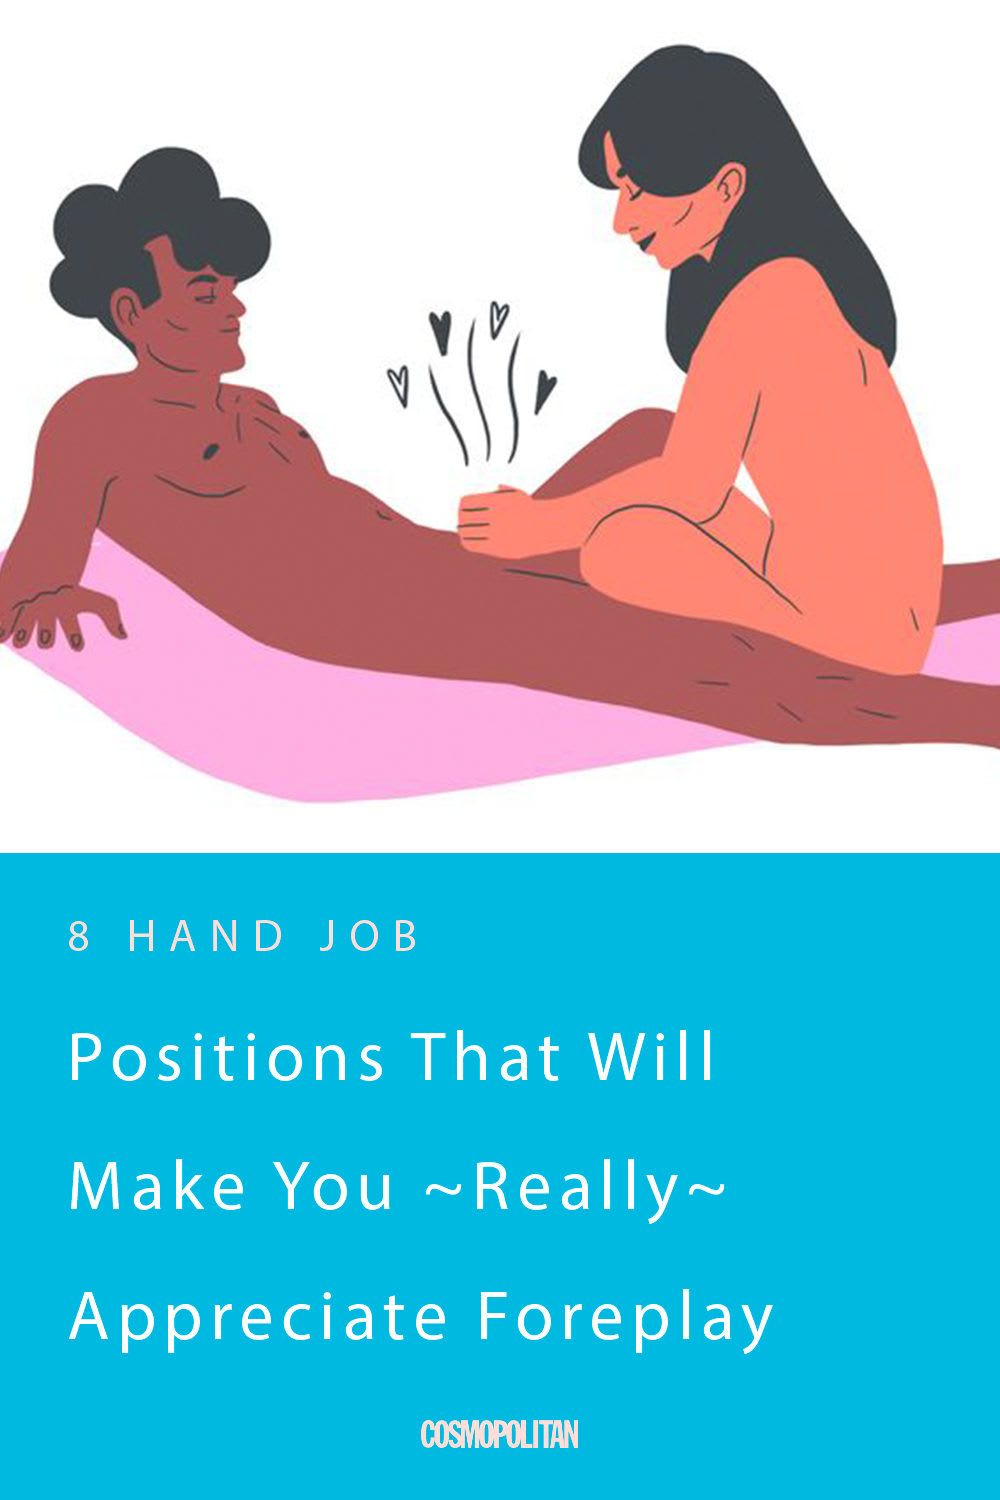 8 Hand Job Positions That Will Make You ~Really~ Appreciate Foreplay